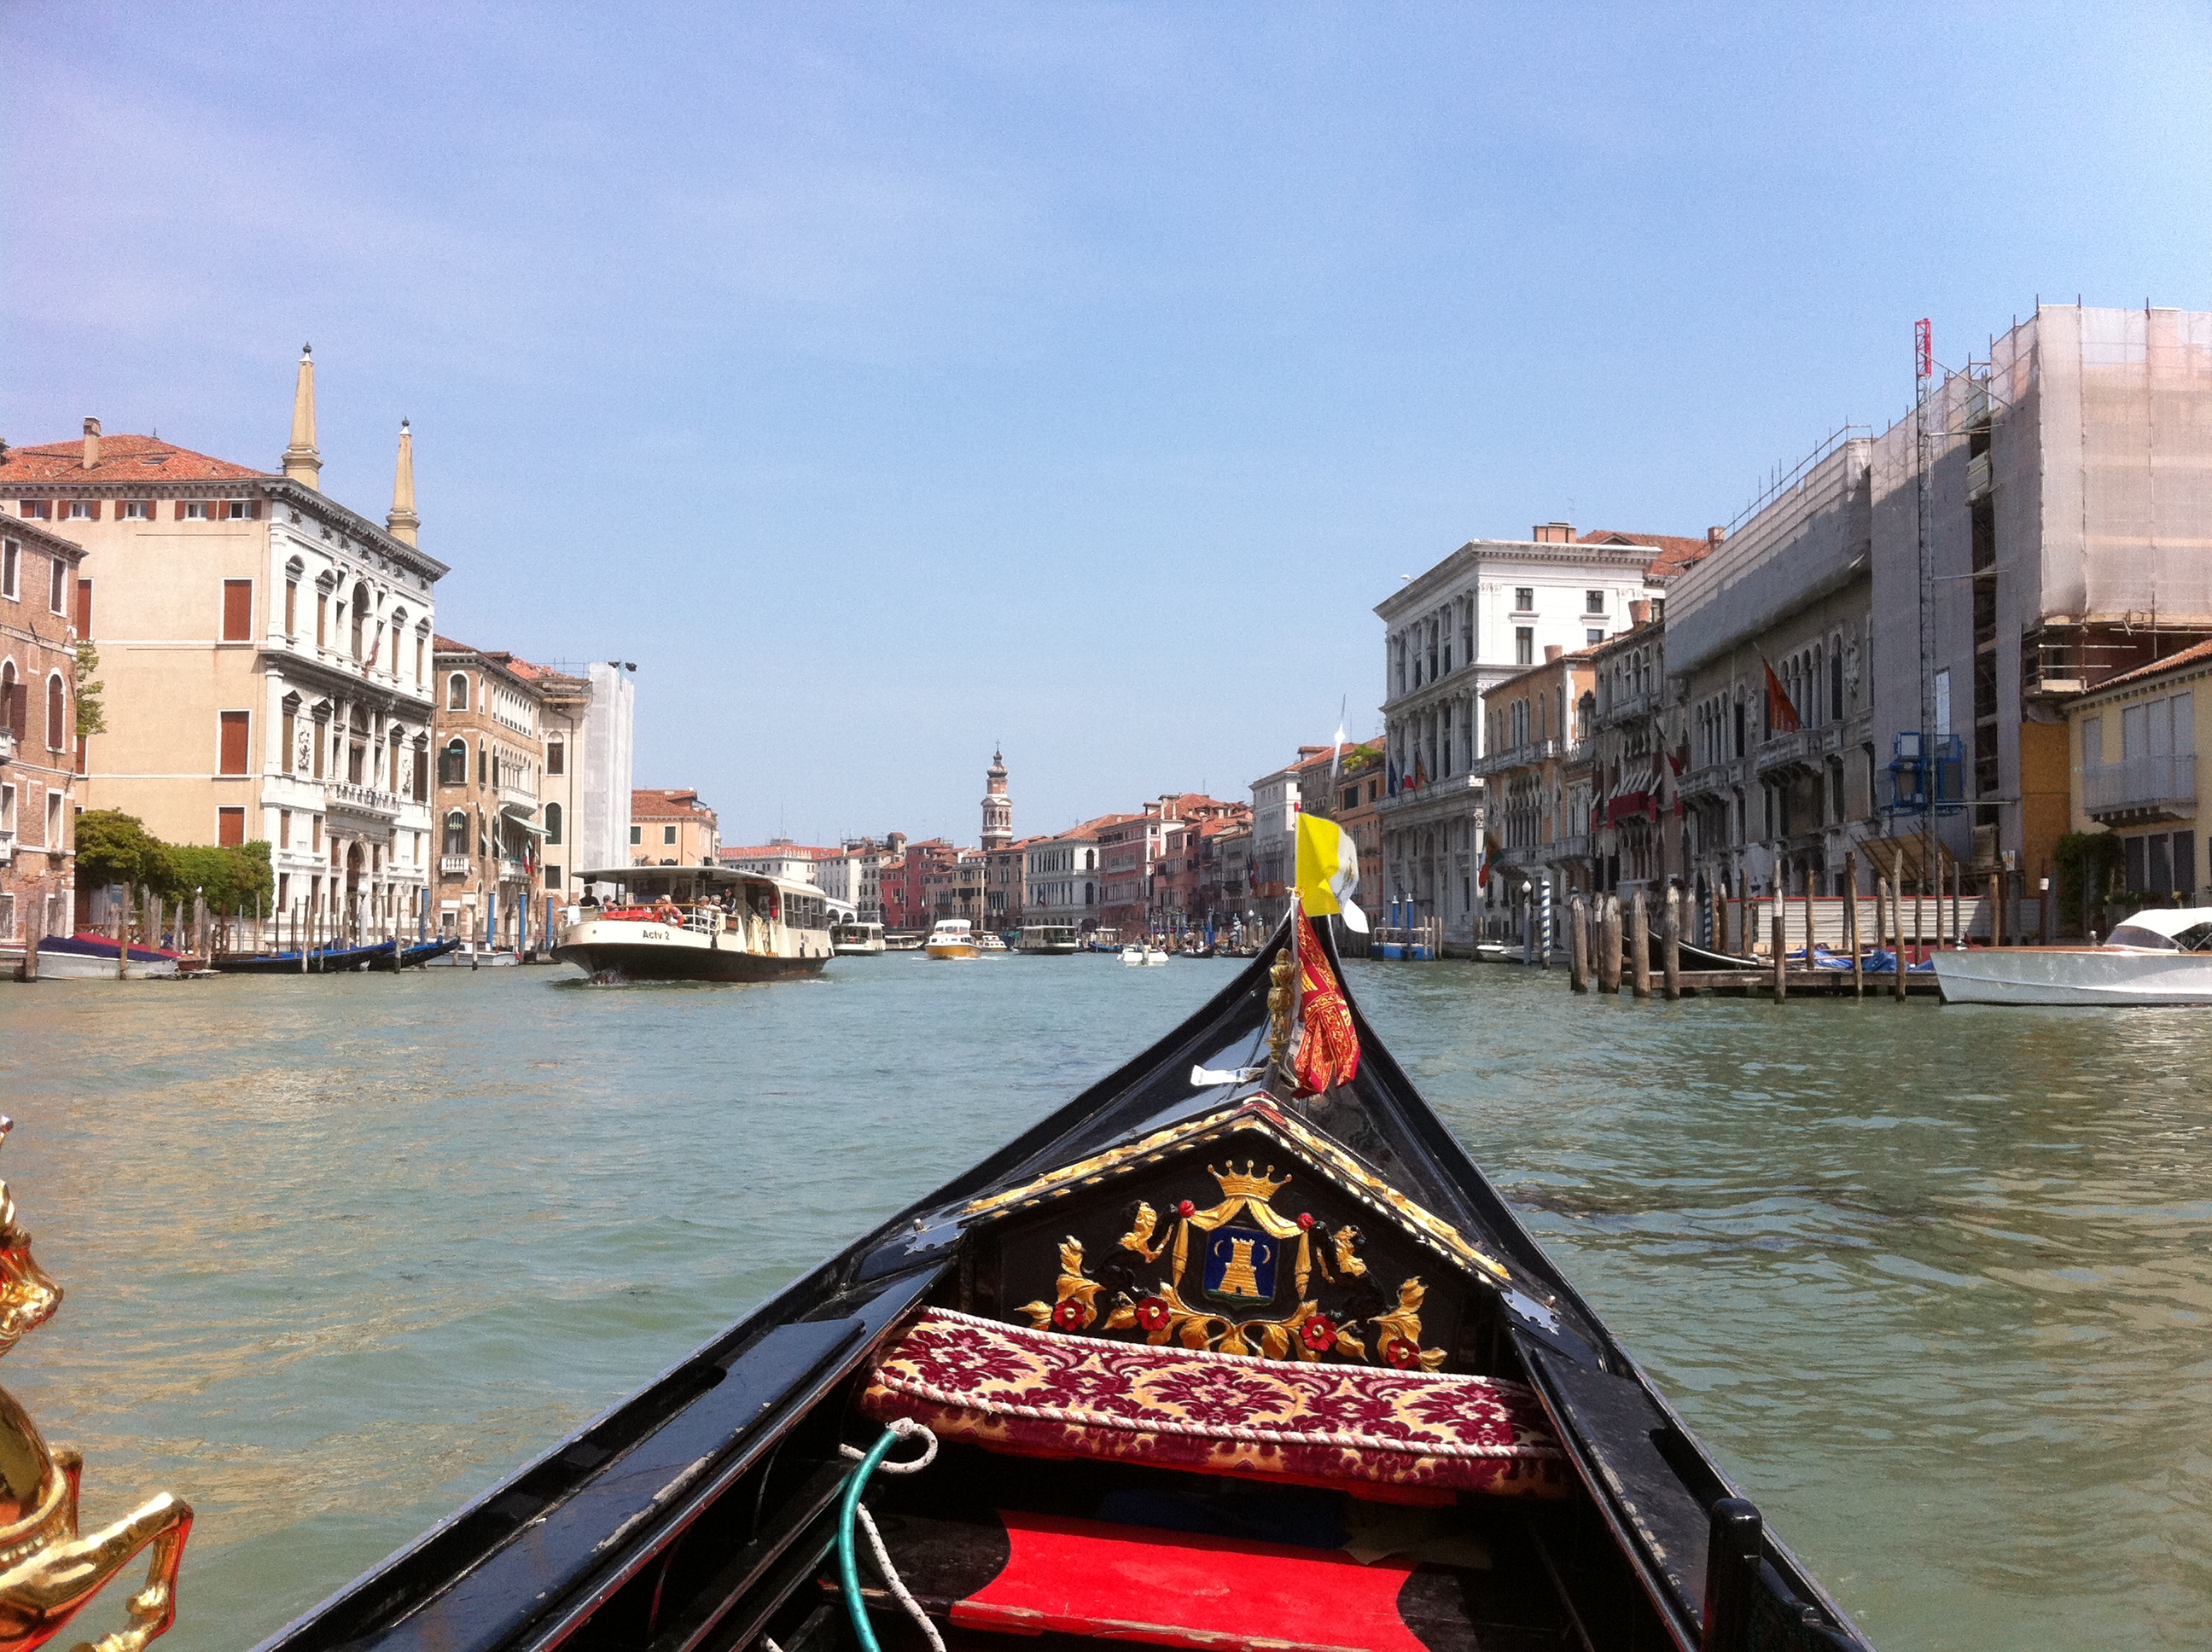 Grand Canal from a gondola, Venice